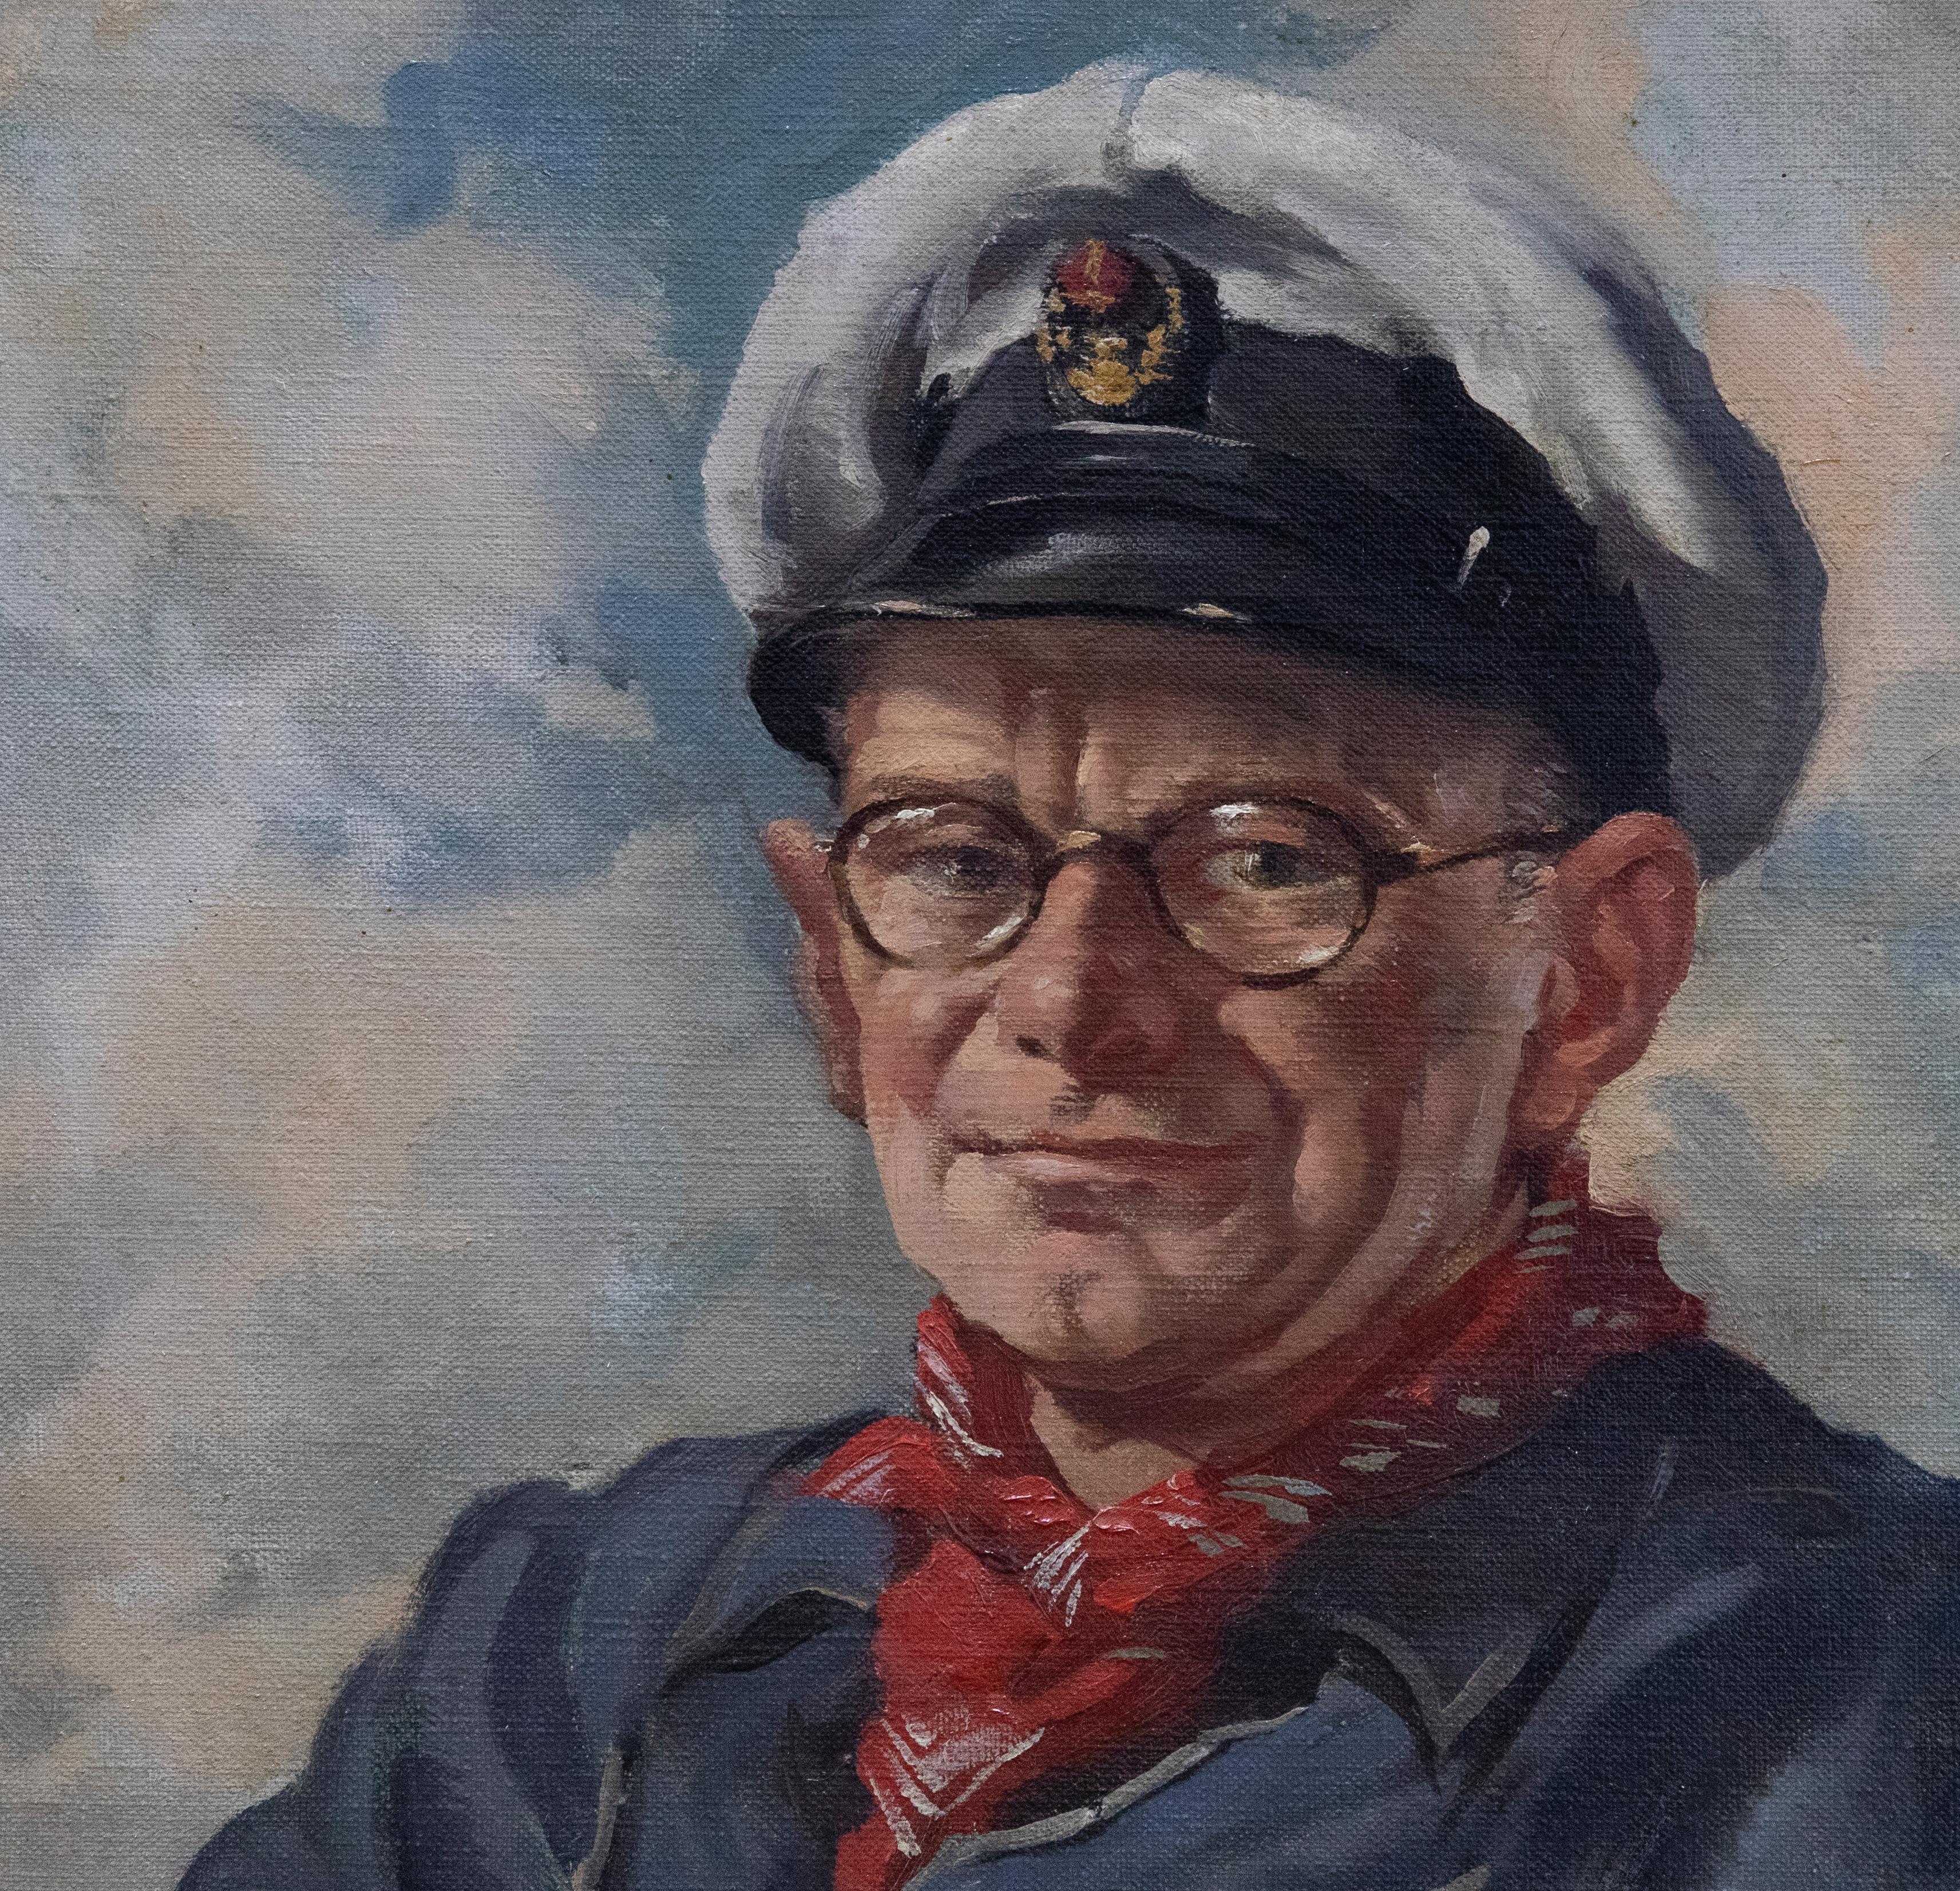 A fine oil portrait of a sea captain at the stern of a boat, wearing a blue naval jacket, red neckerchief, spectacles and commanders hat. Unsigned. Presented in a decorative gilt-effect frame with large corner and centre mouldings. On canvas on